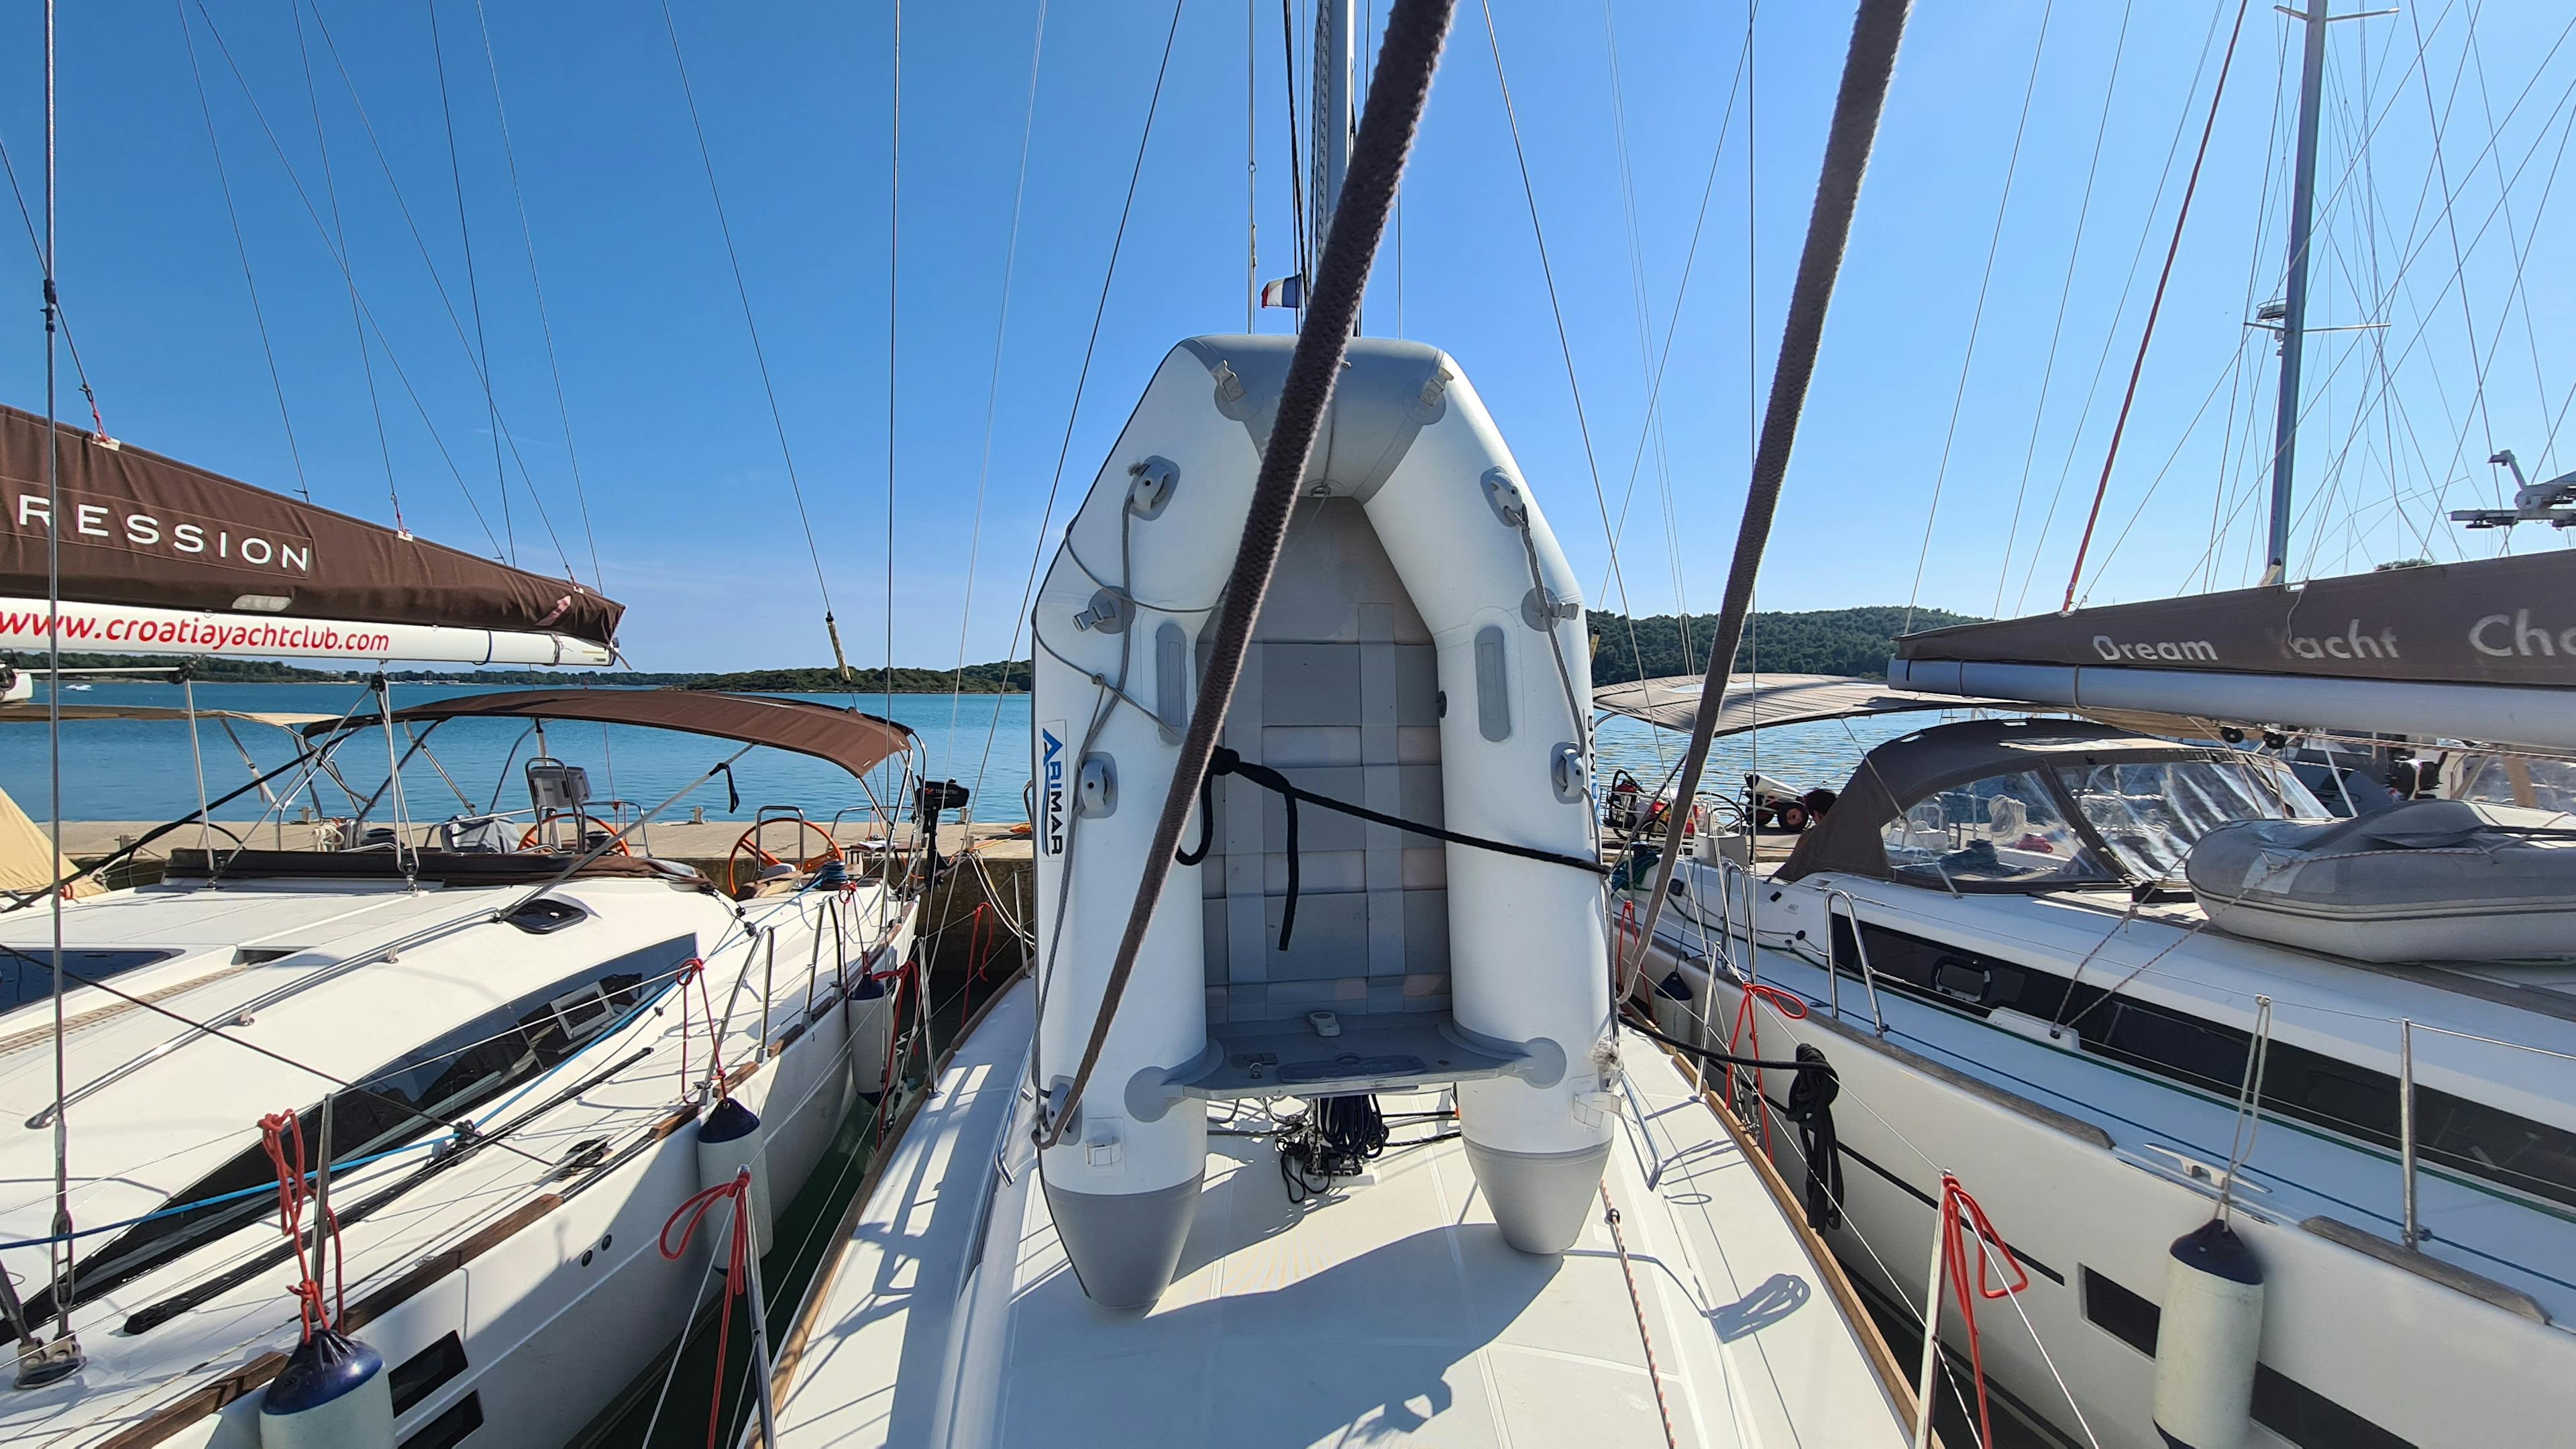 Book Sun Odyssey 349 Sailing yacht for bareboat charter in Pula, ACI Marina Pomer, Istra, Croatia with TripYacht!, picture 8